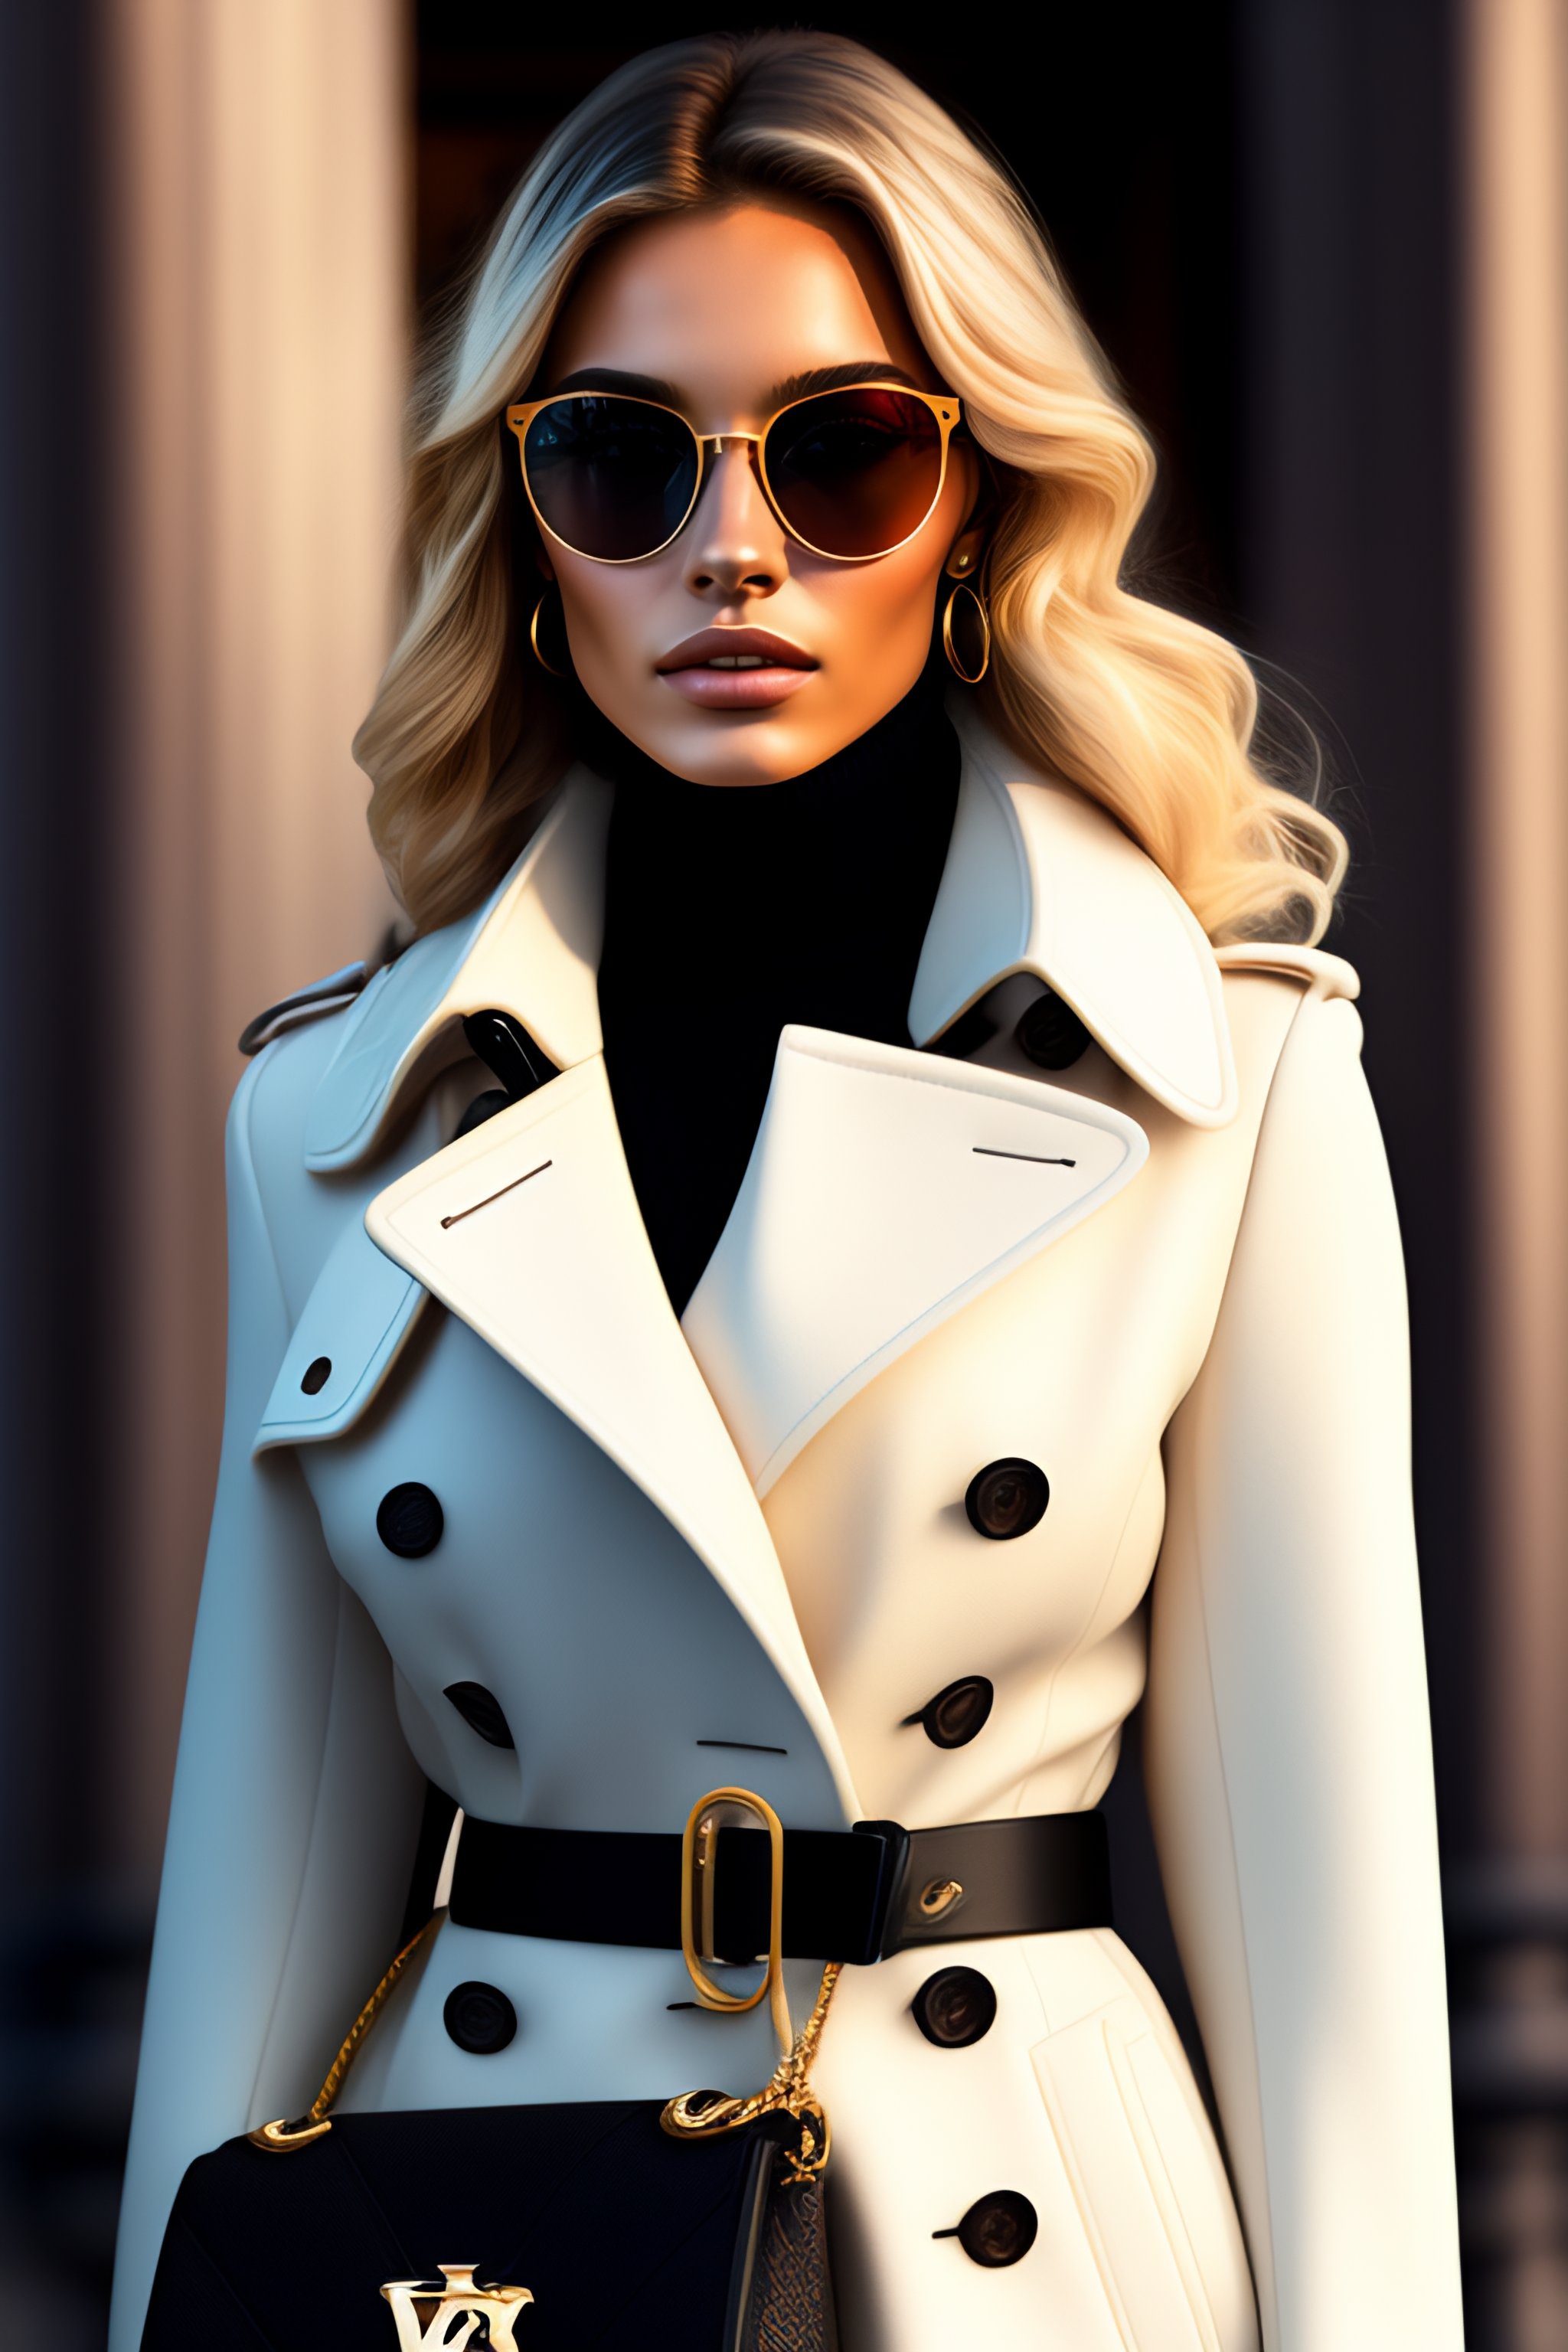 Lexica - Young blonde woman with square sunglasses wearing an open Burberry trench  coat, from the right shoulder hangs a Louis Vuitton Batignolles ha